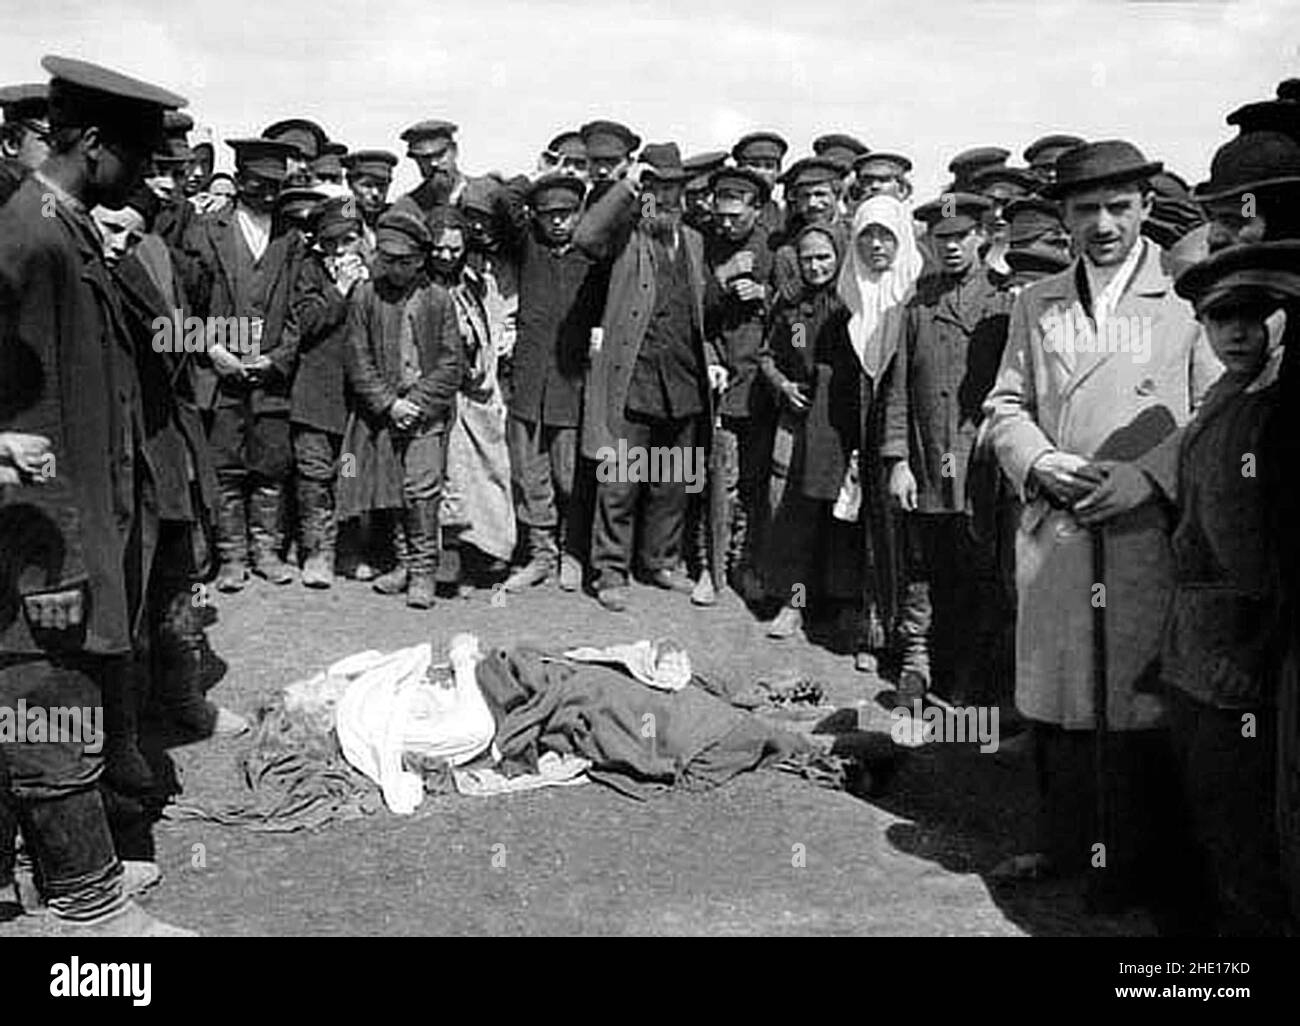 Crushed bodies on the ground after the Khodynka Tragedy - a stampede among the crowd on the Khodynka field during Tsar Nicholas II's coronation killed around 1300 and left many more injured. Stock Photo